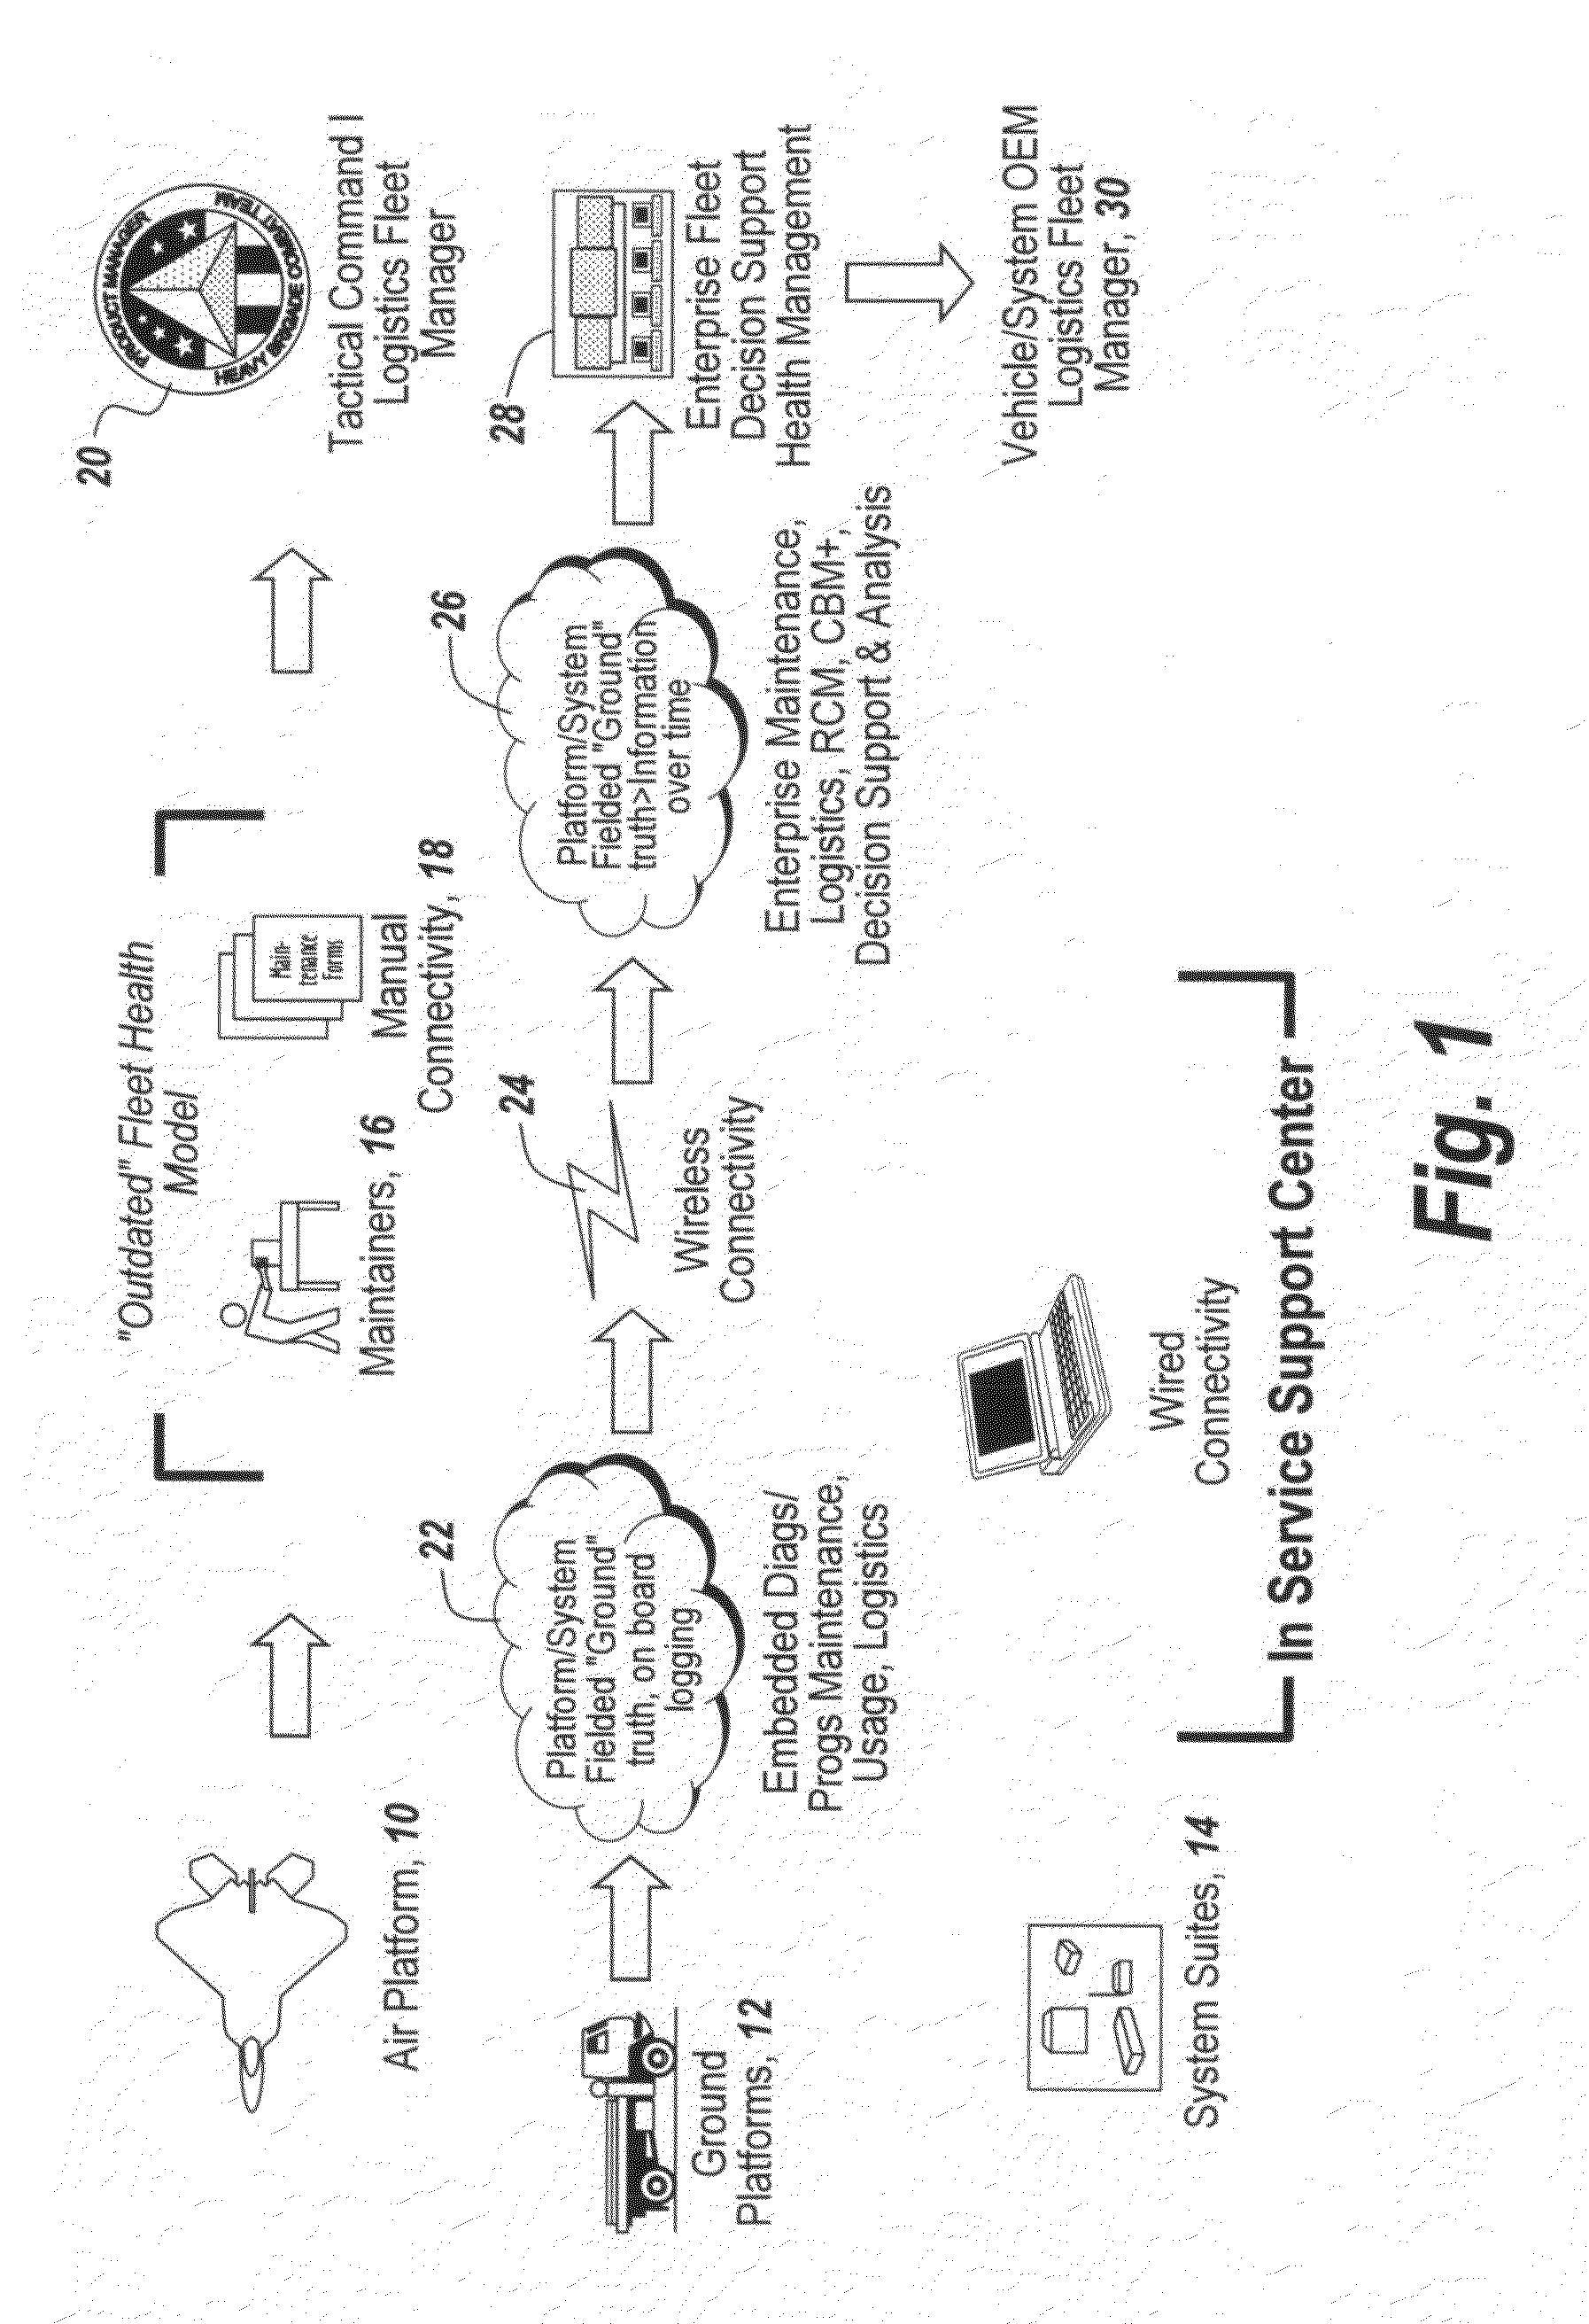 In service support center and method of operation